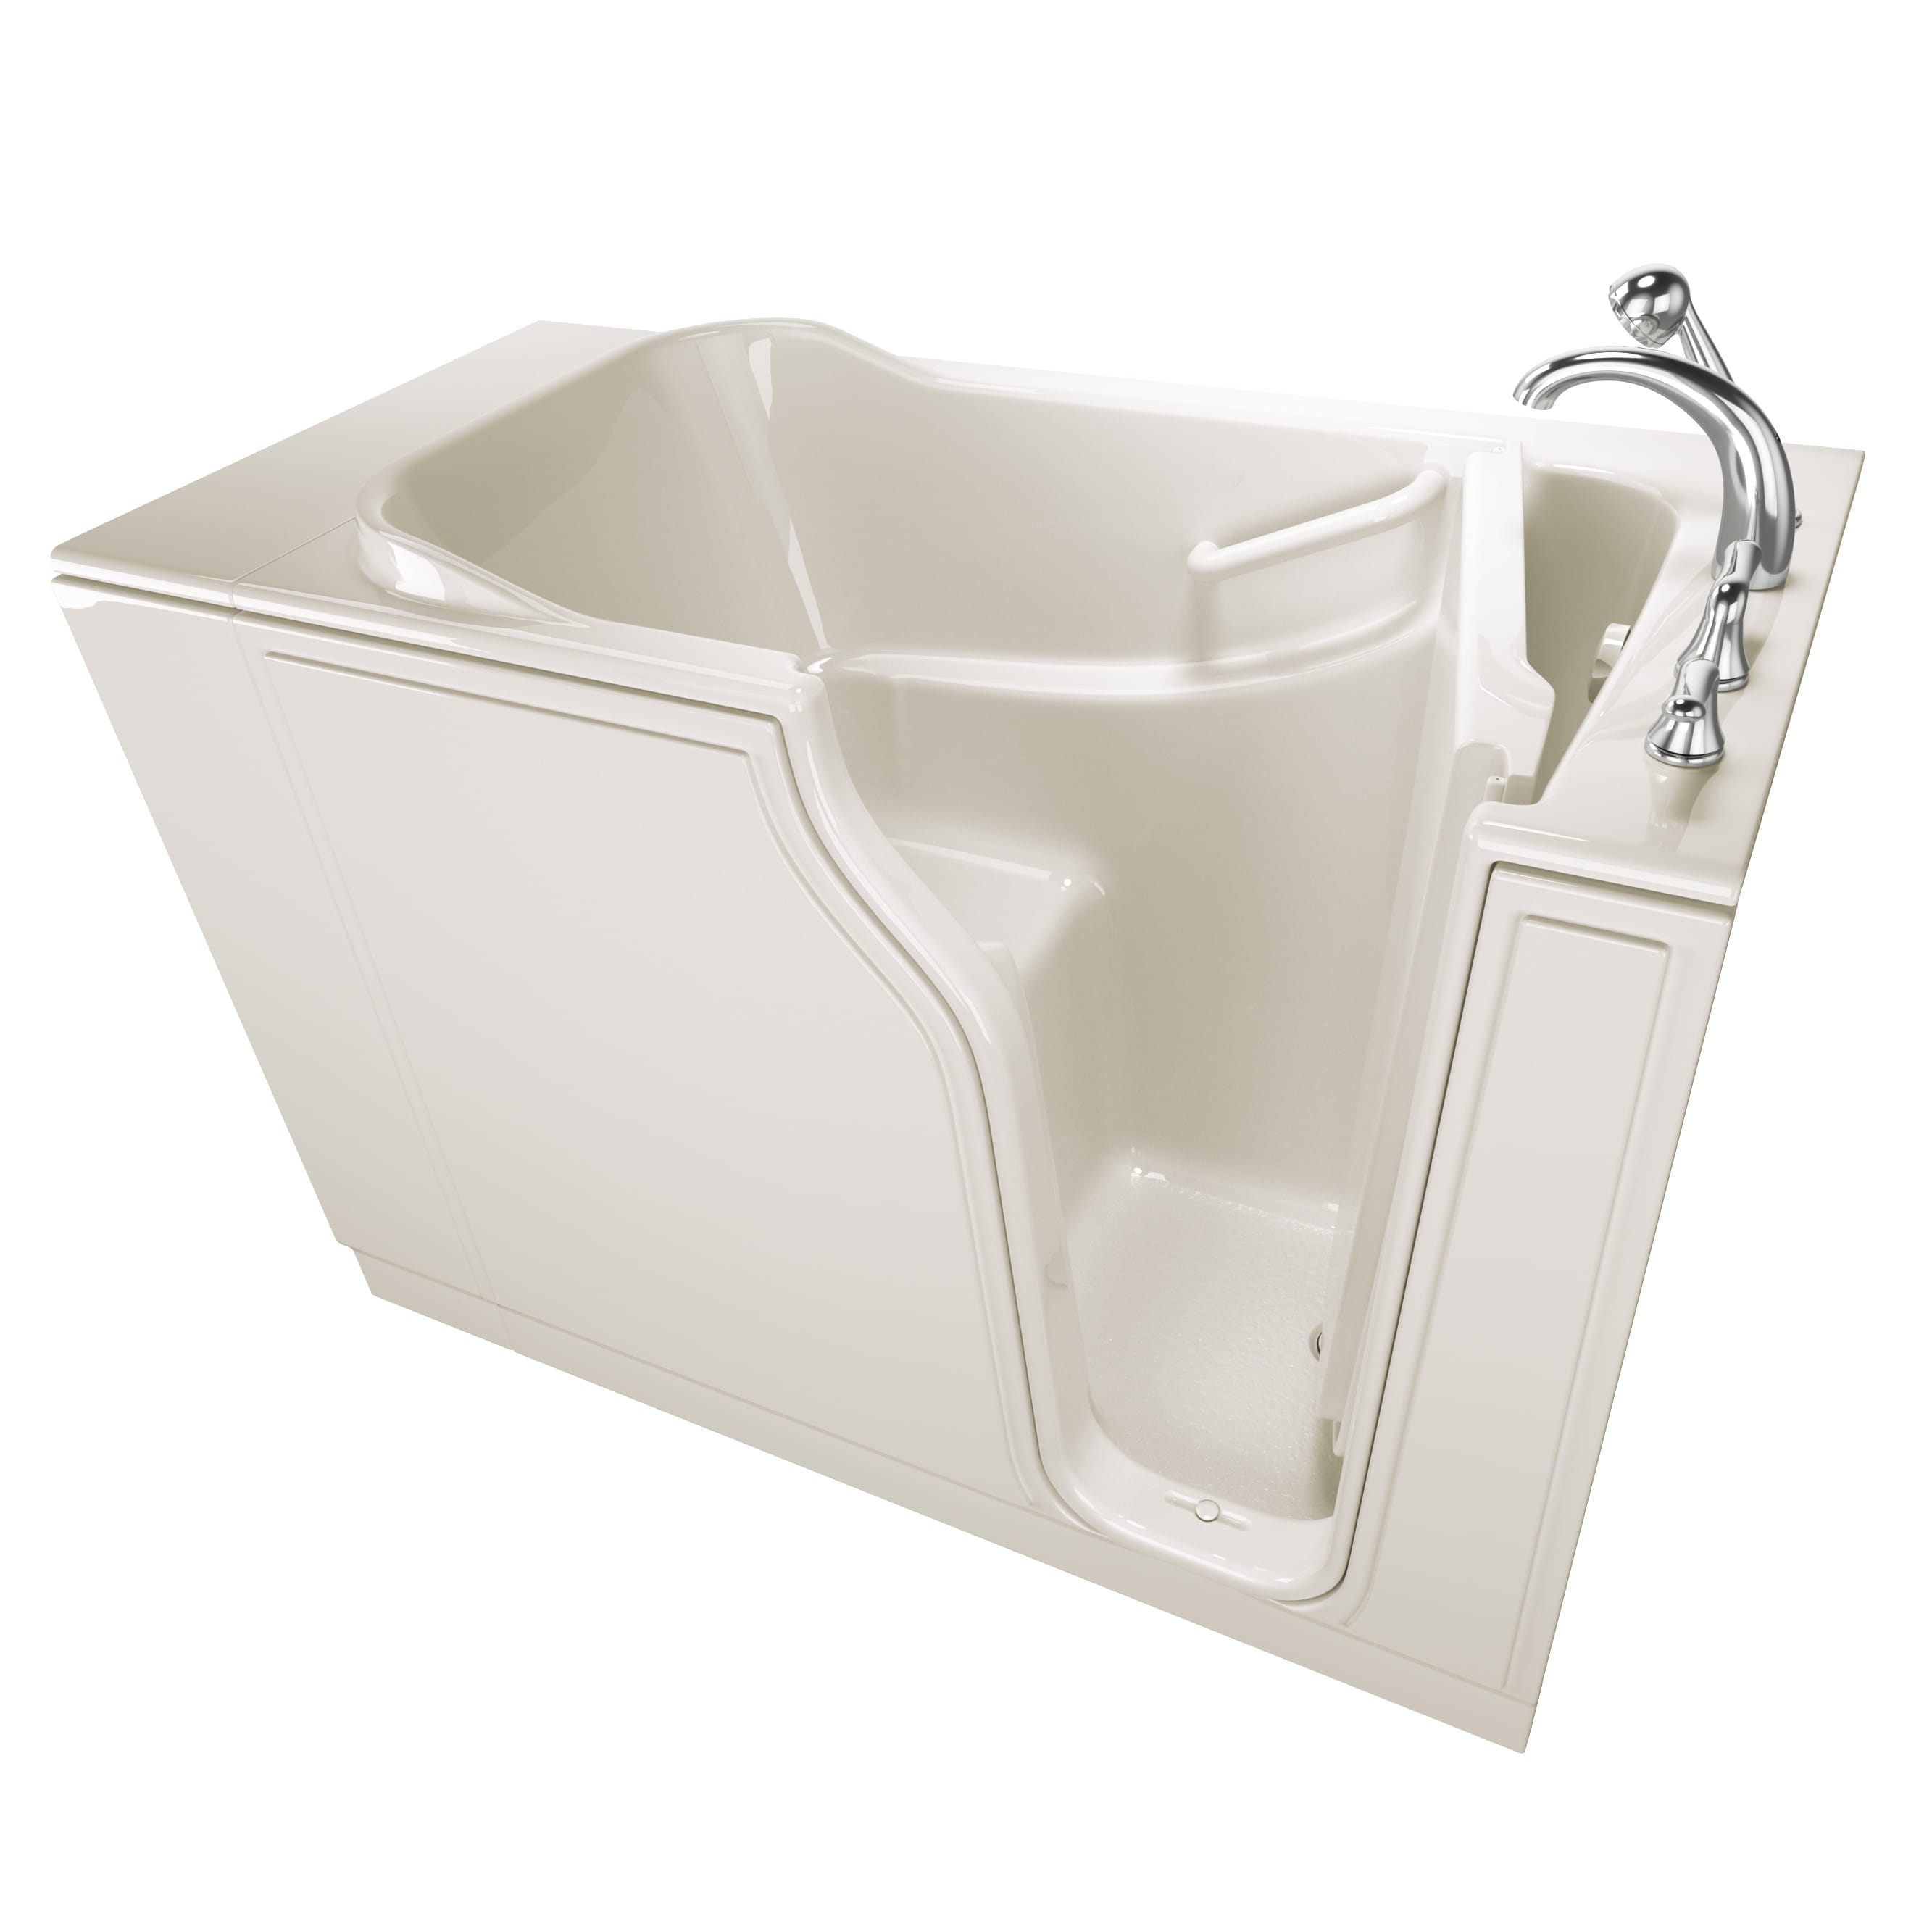 Gelcoat Entry Series 52 x 30 Inch Walk In Tub With Soaker System - Right Hand Drain With Faucet BISCUIT